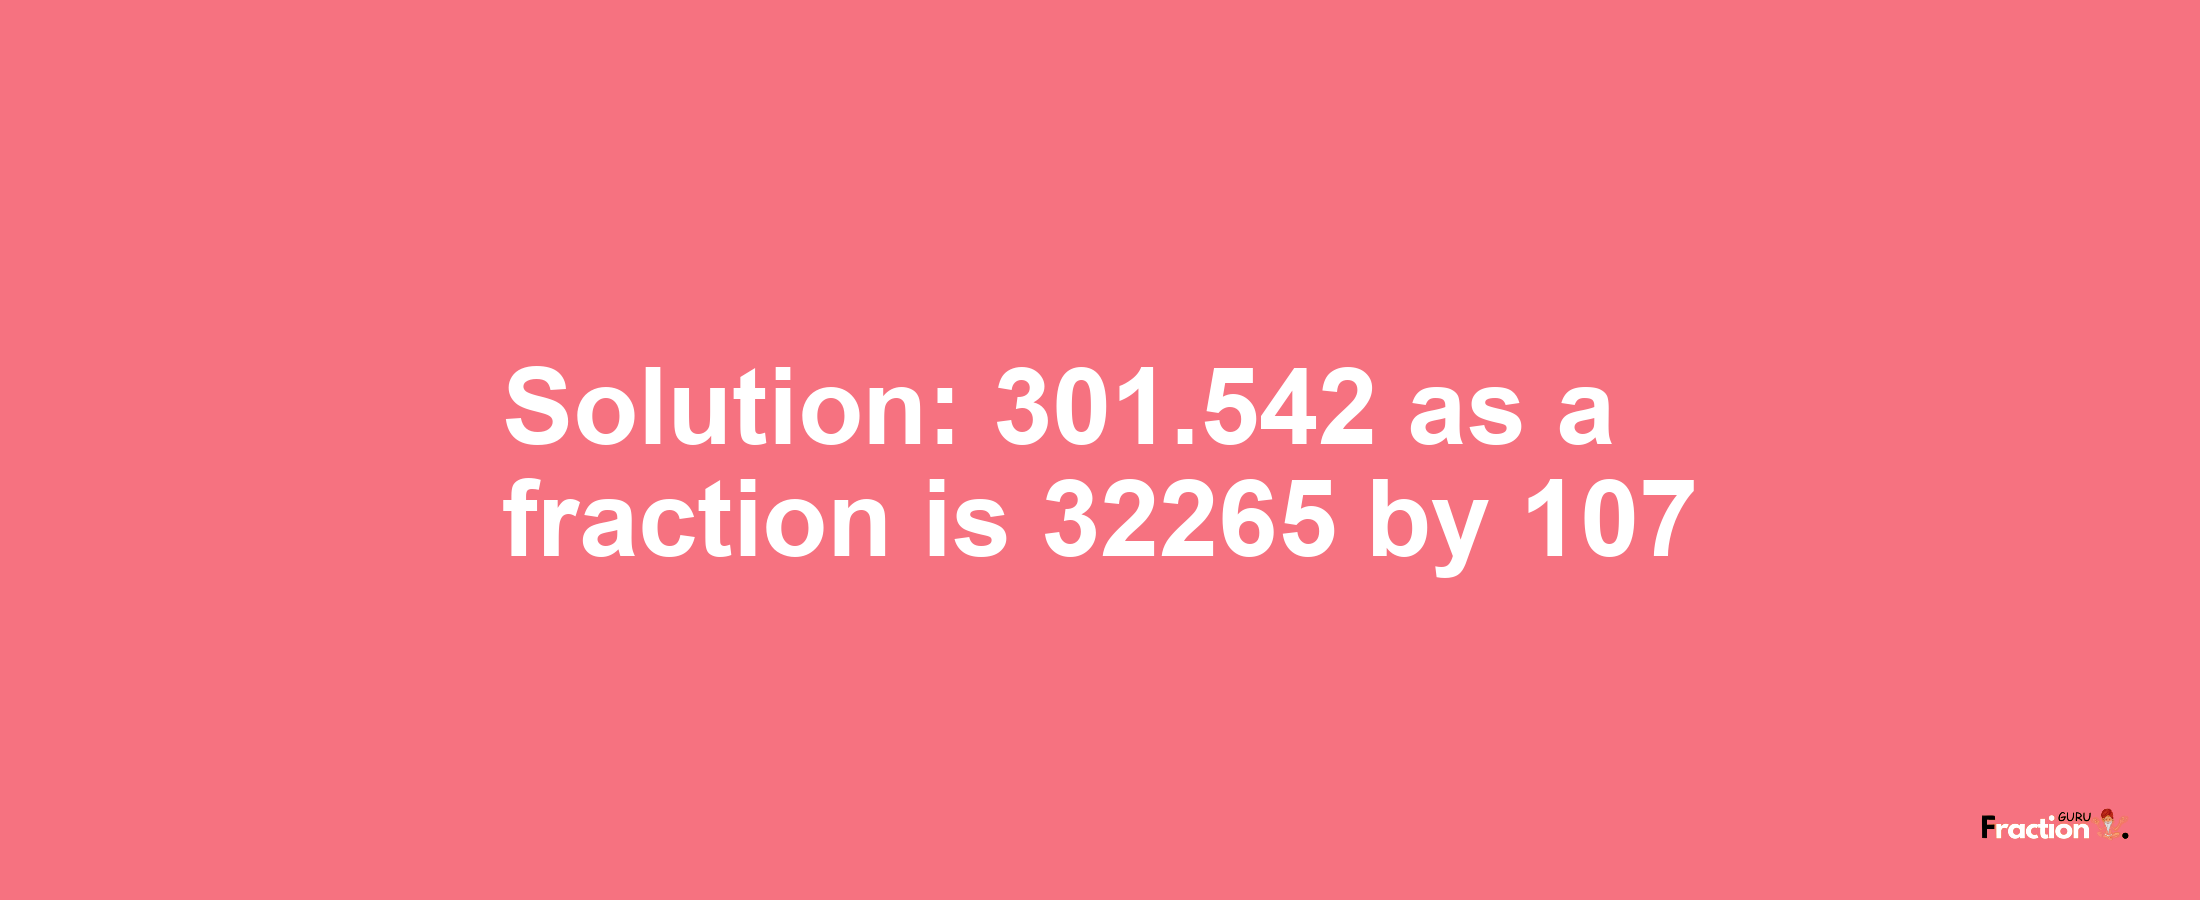 Solution:301.542 as a fraction is 32265/107